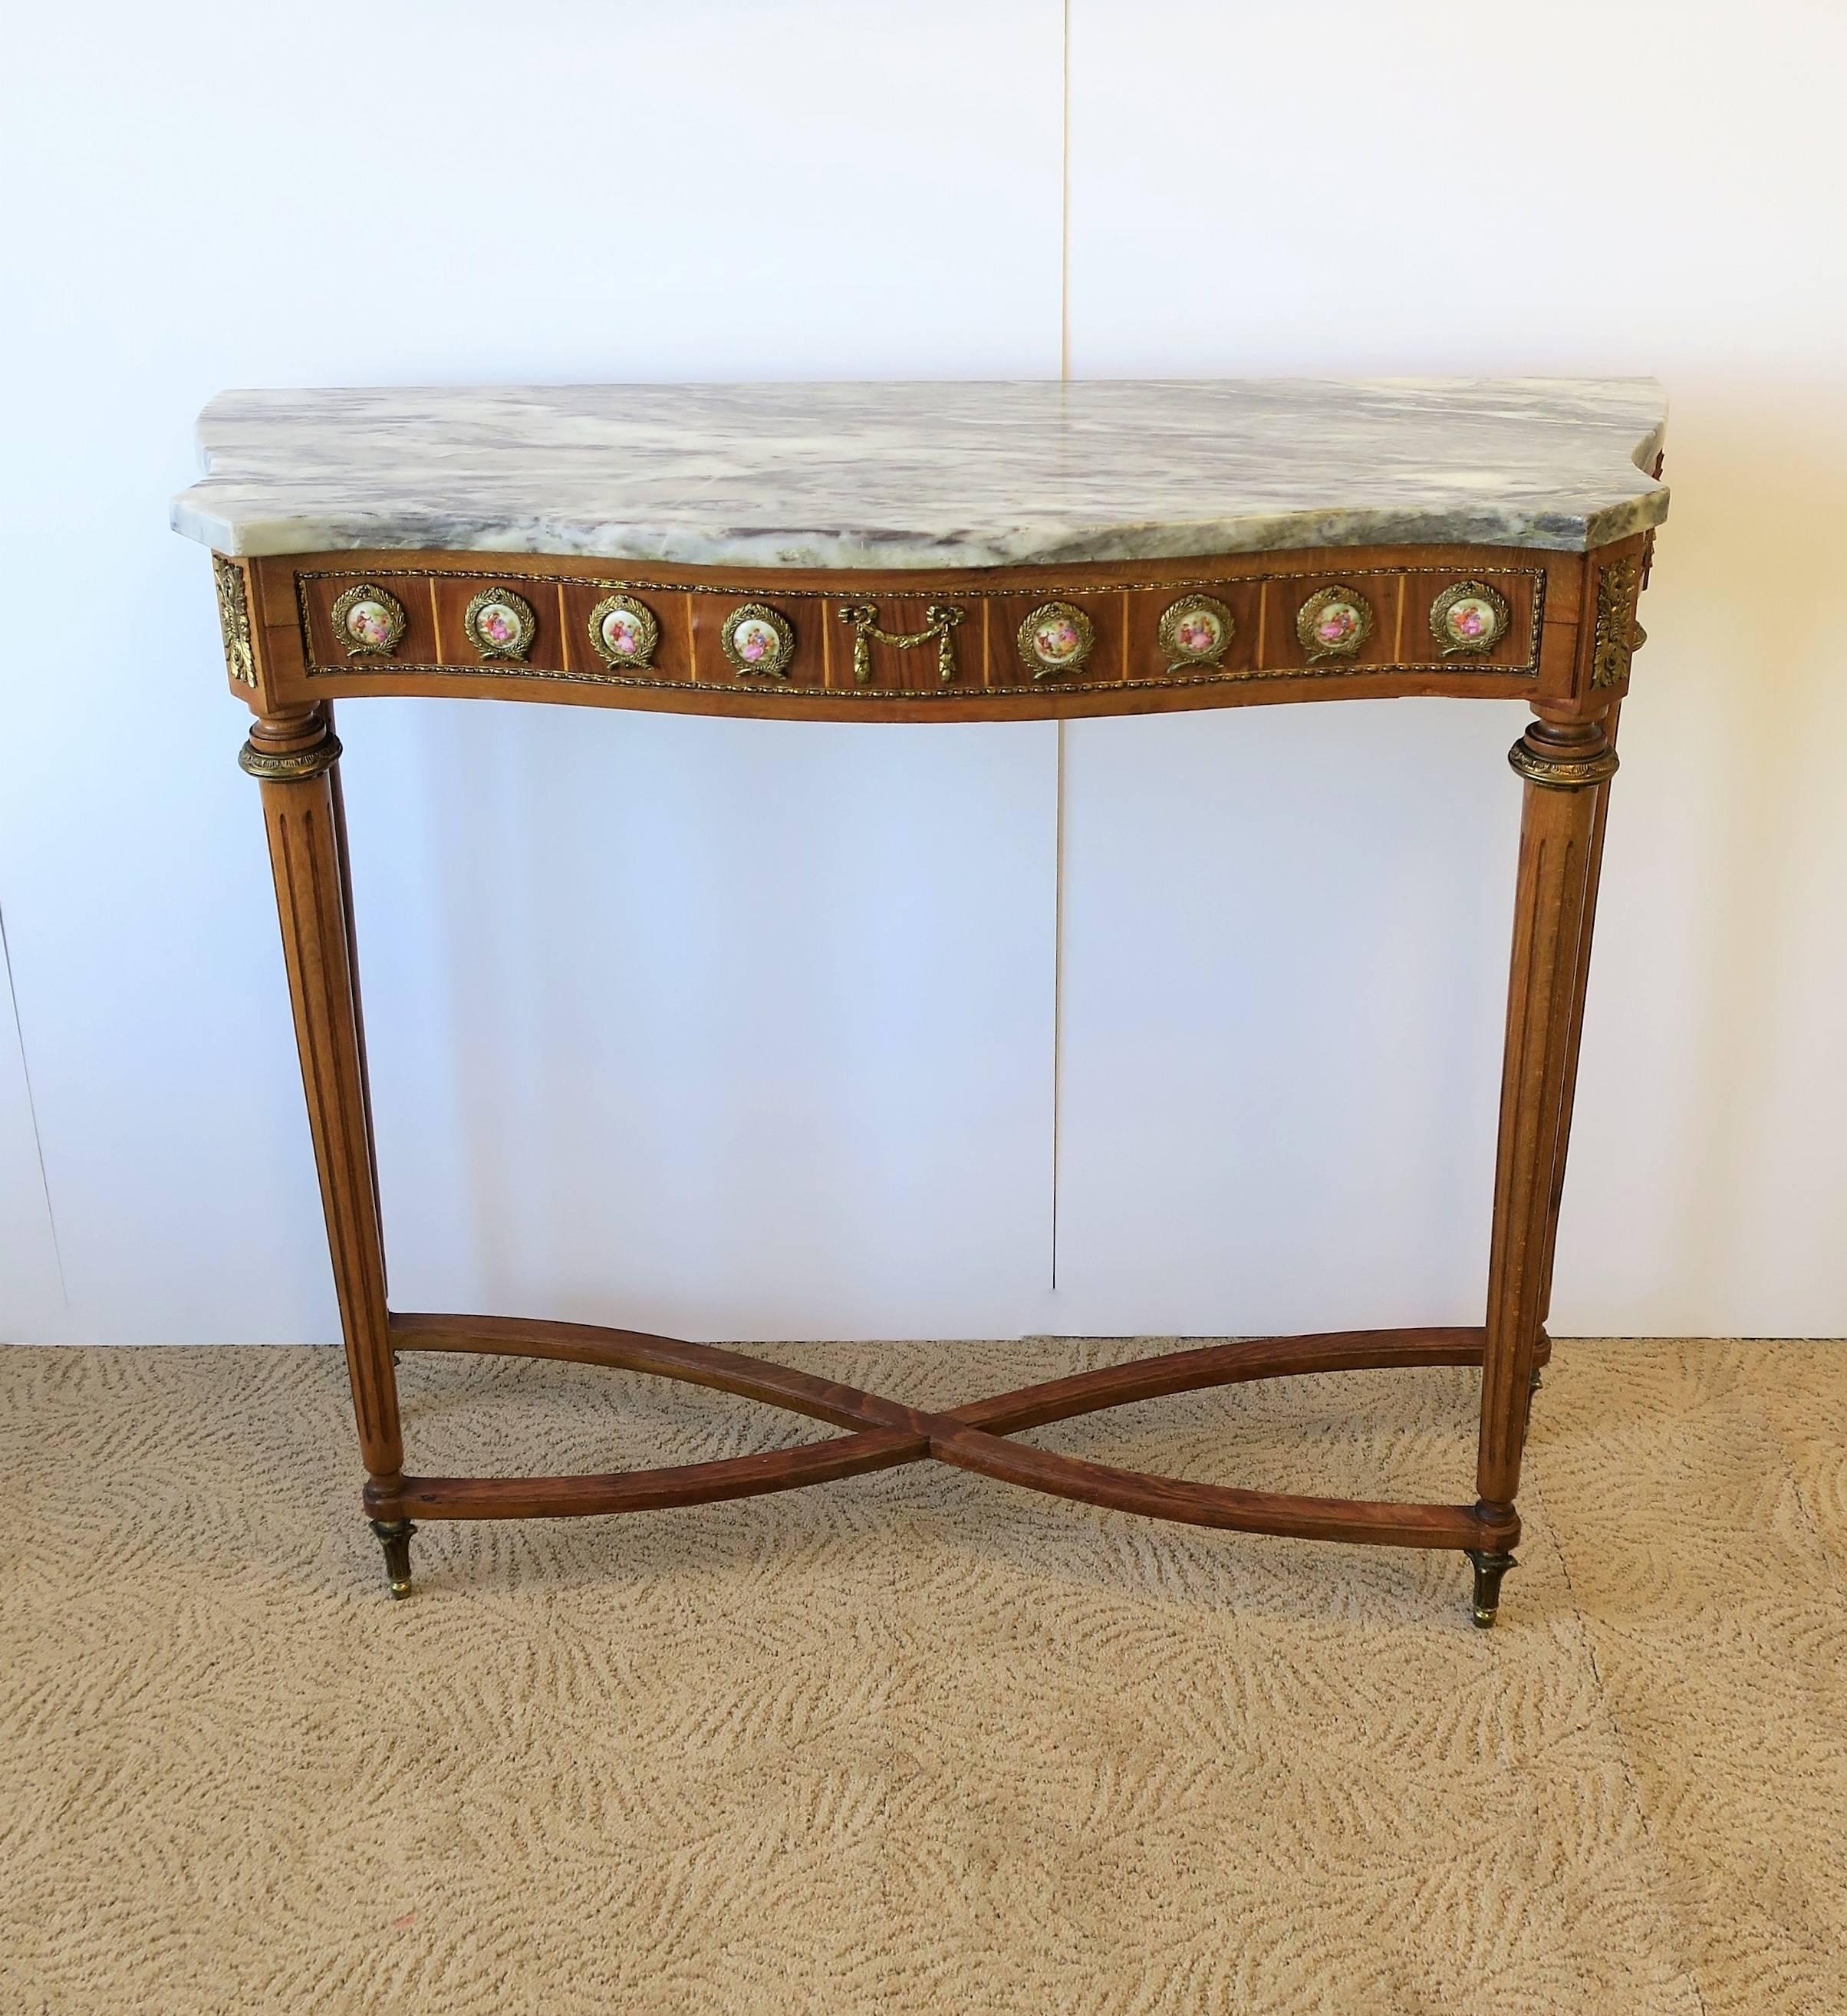 A console table with grey/dark grey/white marble top, wood base, and porcelain and brass ormolu mounts, in the Neoclassical style, circa mid-20th century, 1960s. Details include substantial marble top, shape of marble top, brass and porcelain mounts